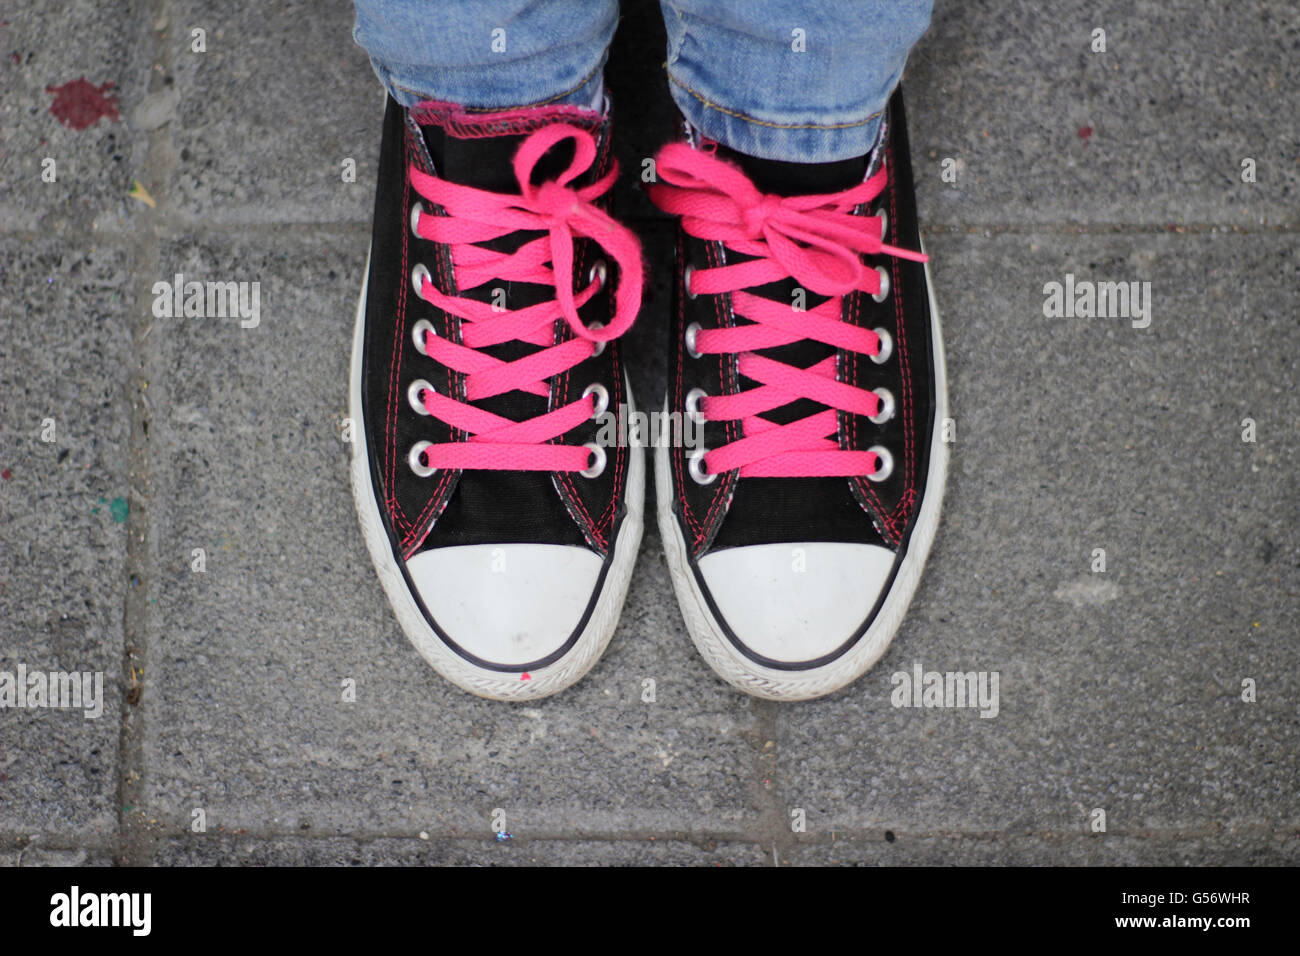 Photograph of a pair of classic tennis shoes and jeans Stock Photo